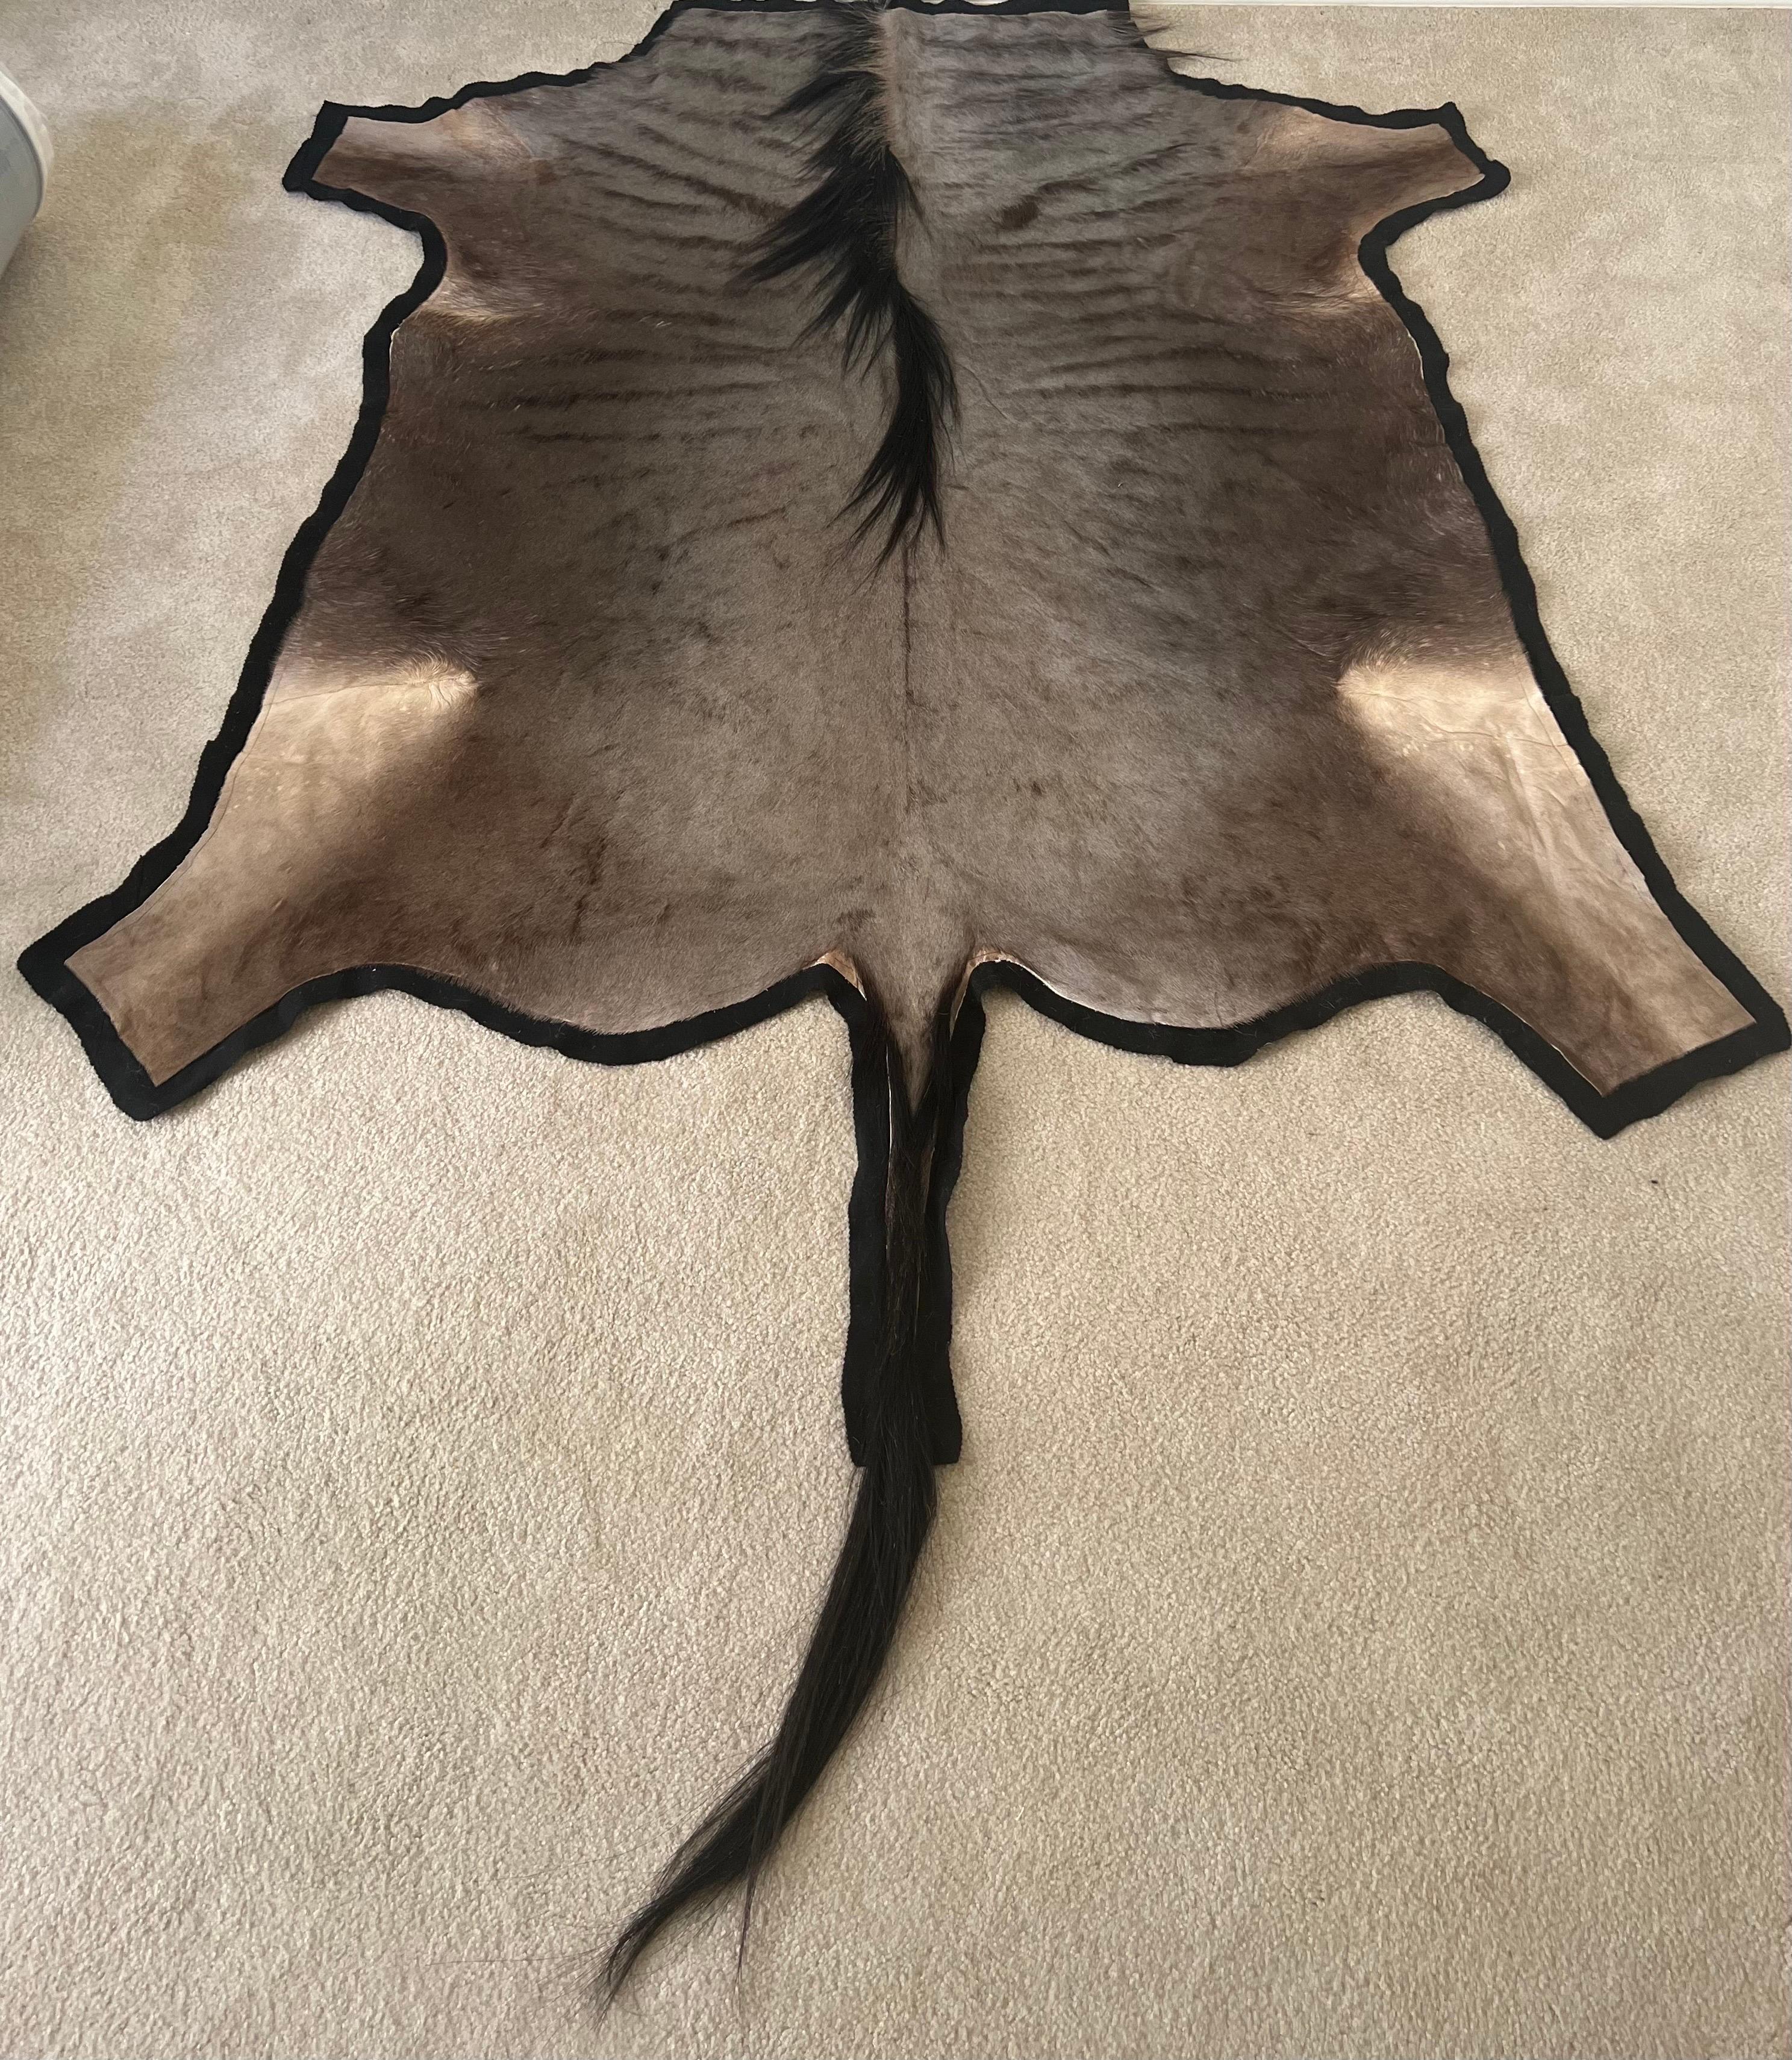 A noble and elegant African blue wildebeest rug or carpet from the British Colonial era in Kenya. Blue Wildebeest are known beautiful and subtle color range of their hides. The natural hide has mostly shades of grays that have a bluish sheen and is